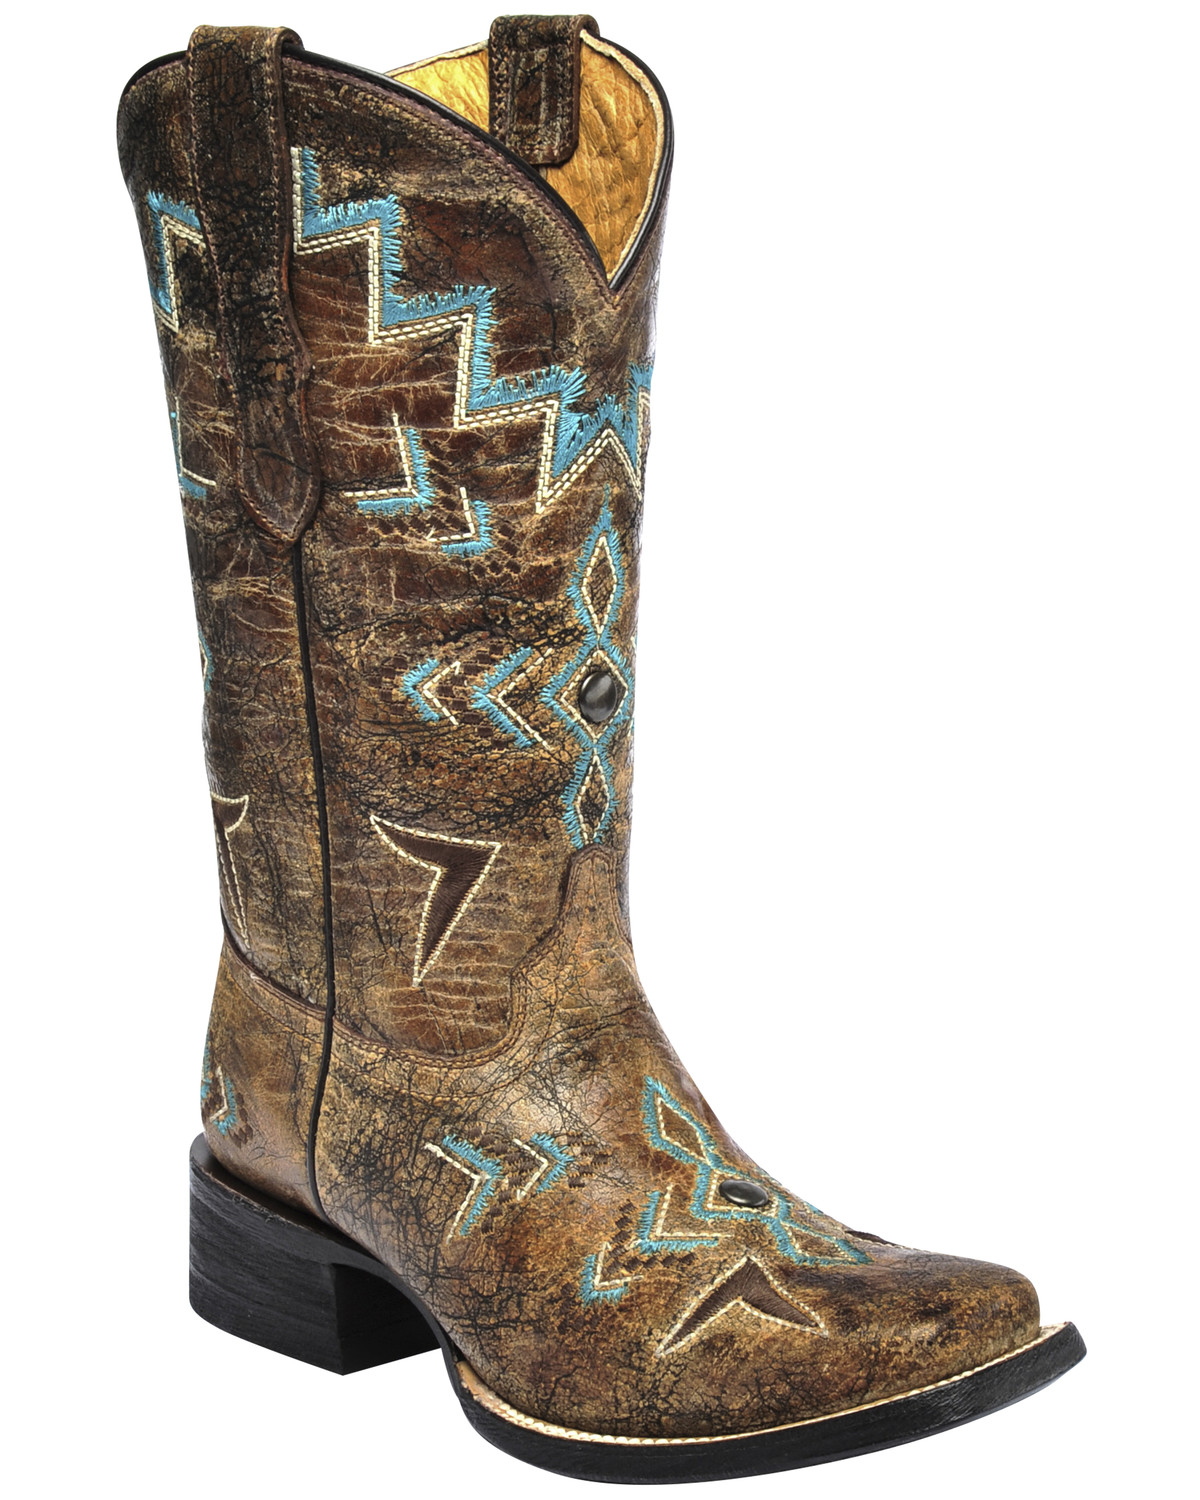 G1193 CORRAL Girls' Scroll Embroidery Boot Square Toe 